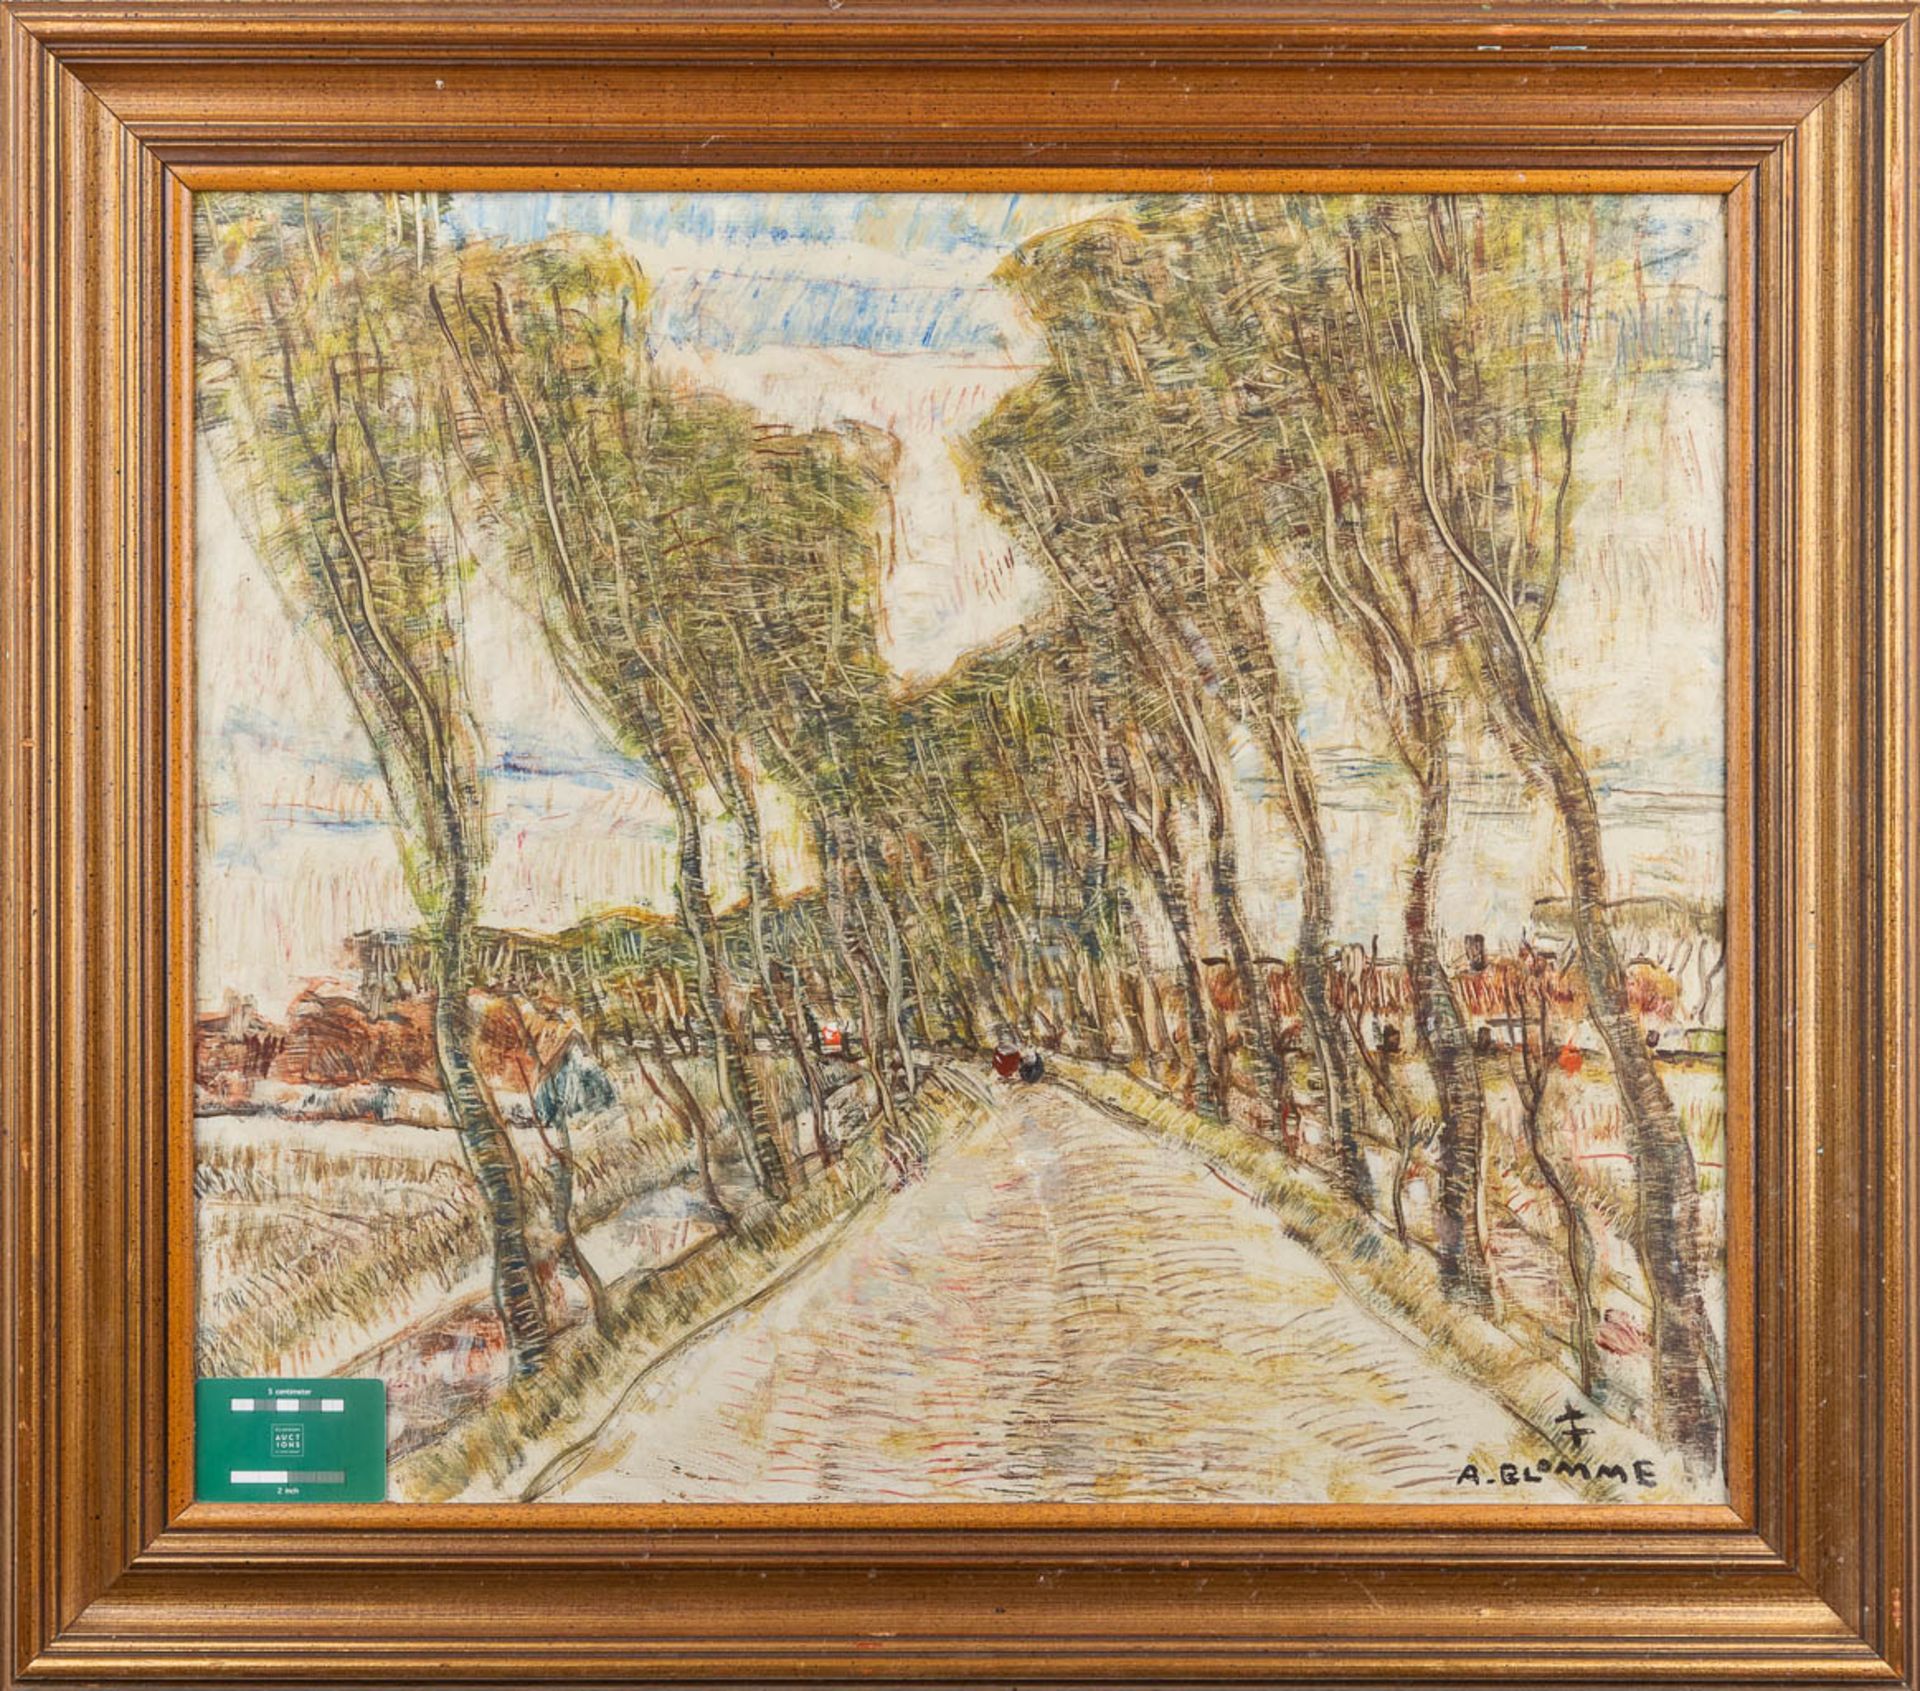 Alfons BLOMME (1889-1979) 'View of a road' oil on board. (W: 70 x H: 60 cm) - Image 2 of 6